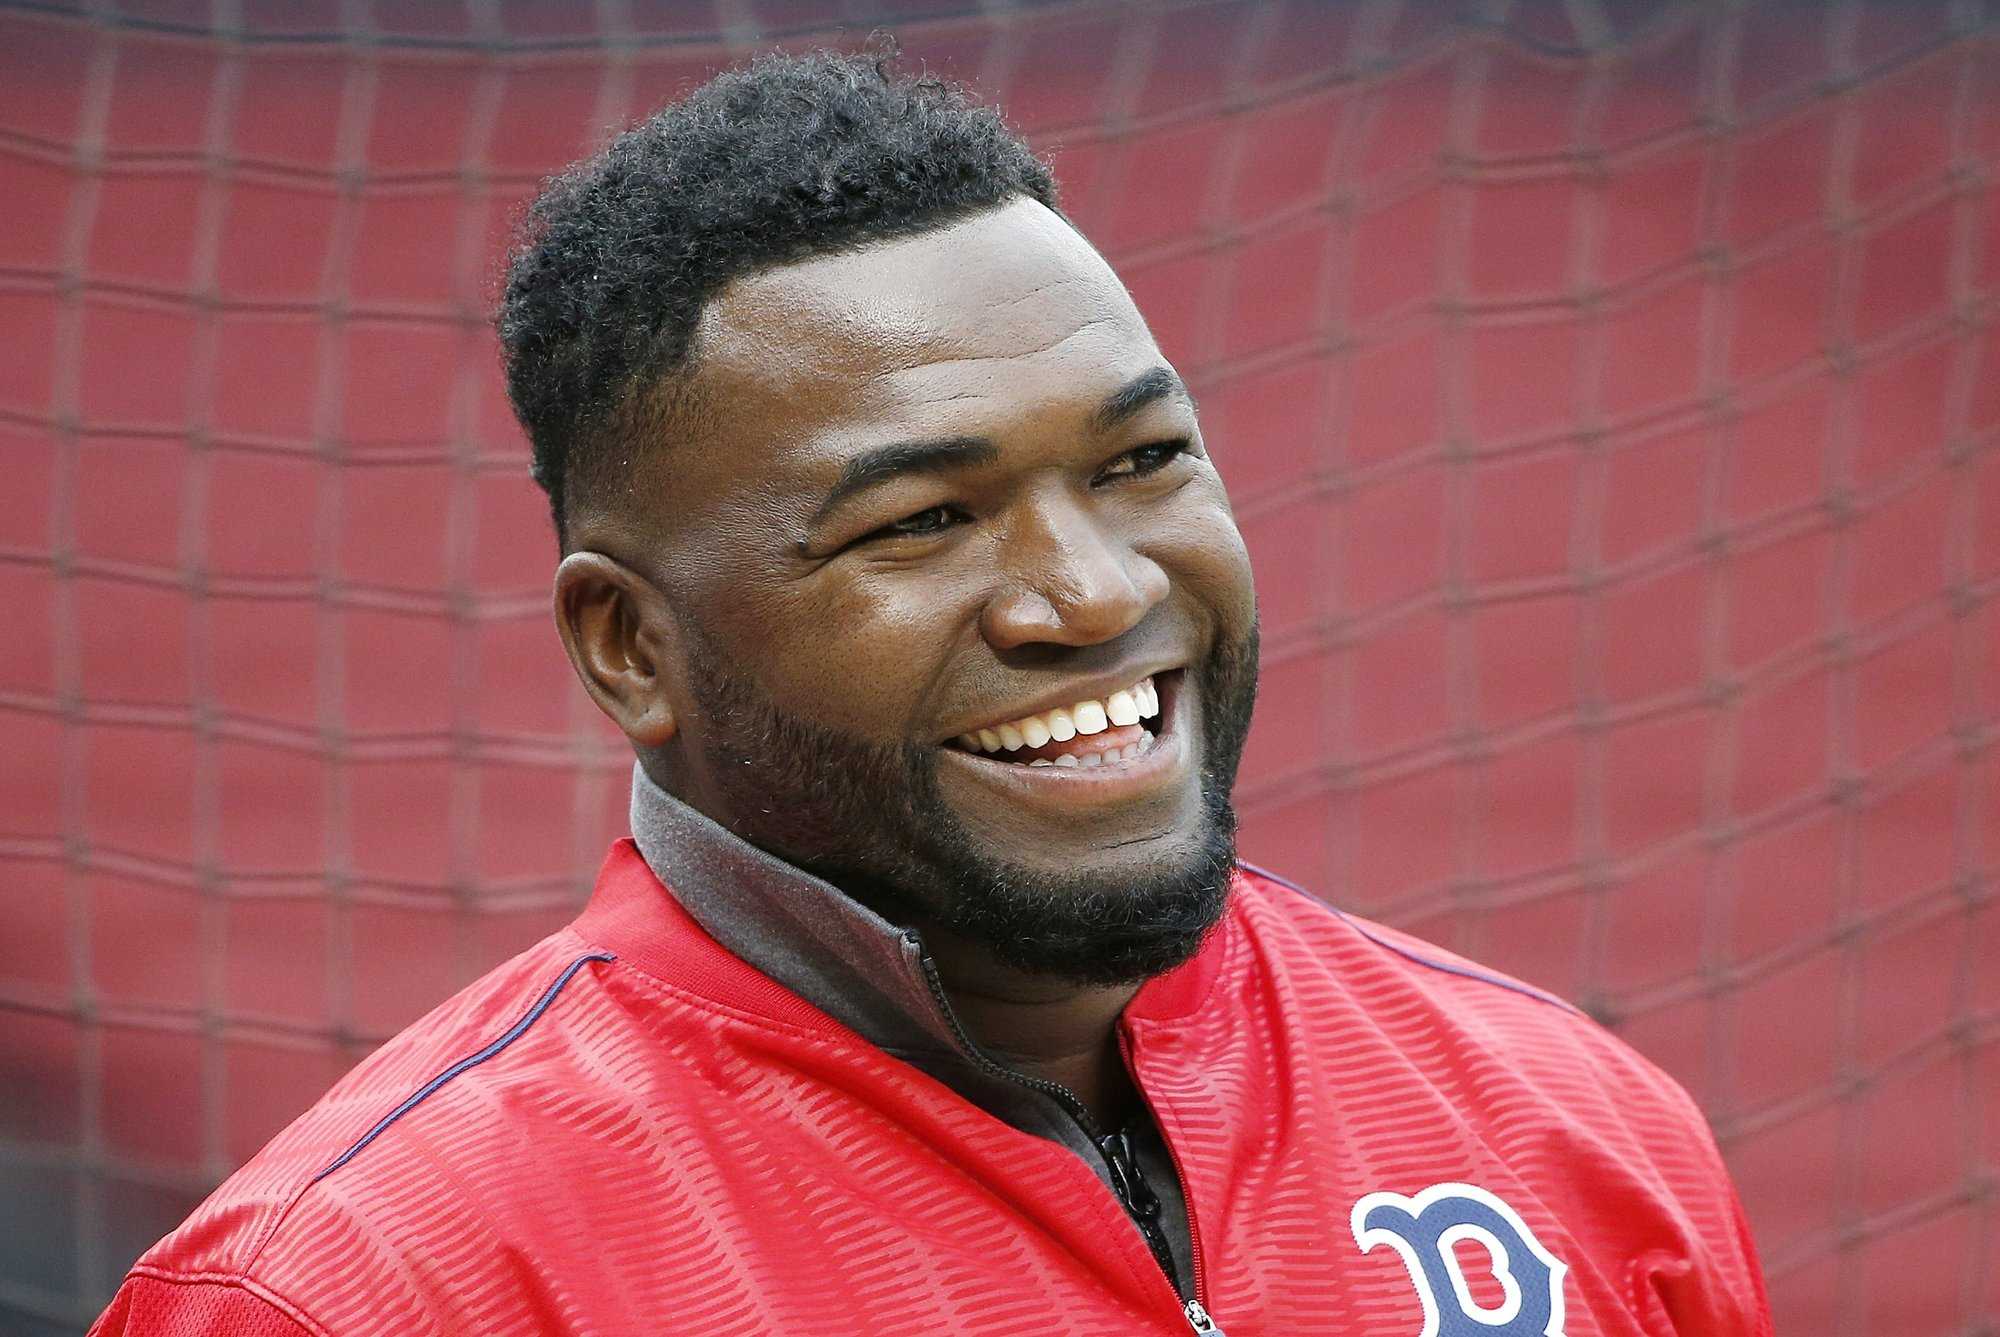 Boston Red Sox icon David Ortiz elected to Baseball Hall of Fame